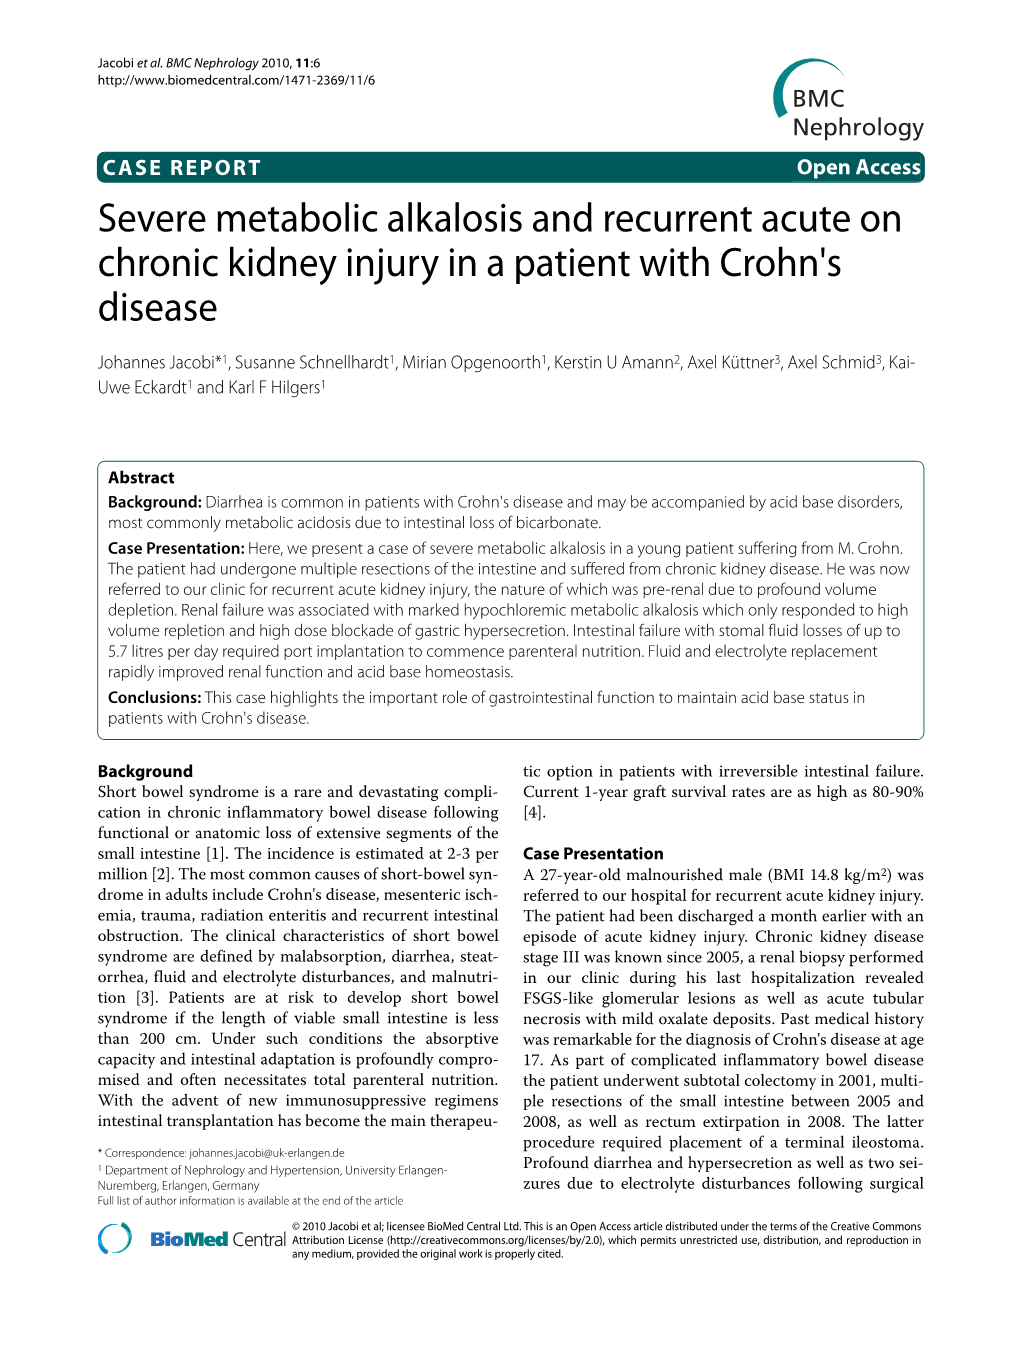 Severe Metabolic Alkalosis and Recurrent Acute on Chronic Kidney Injury in a Patient with Crohn's Disease BMC Nephrol- Ogy 2010, 11:6